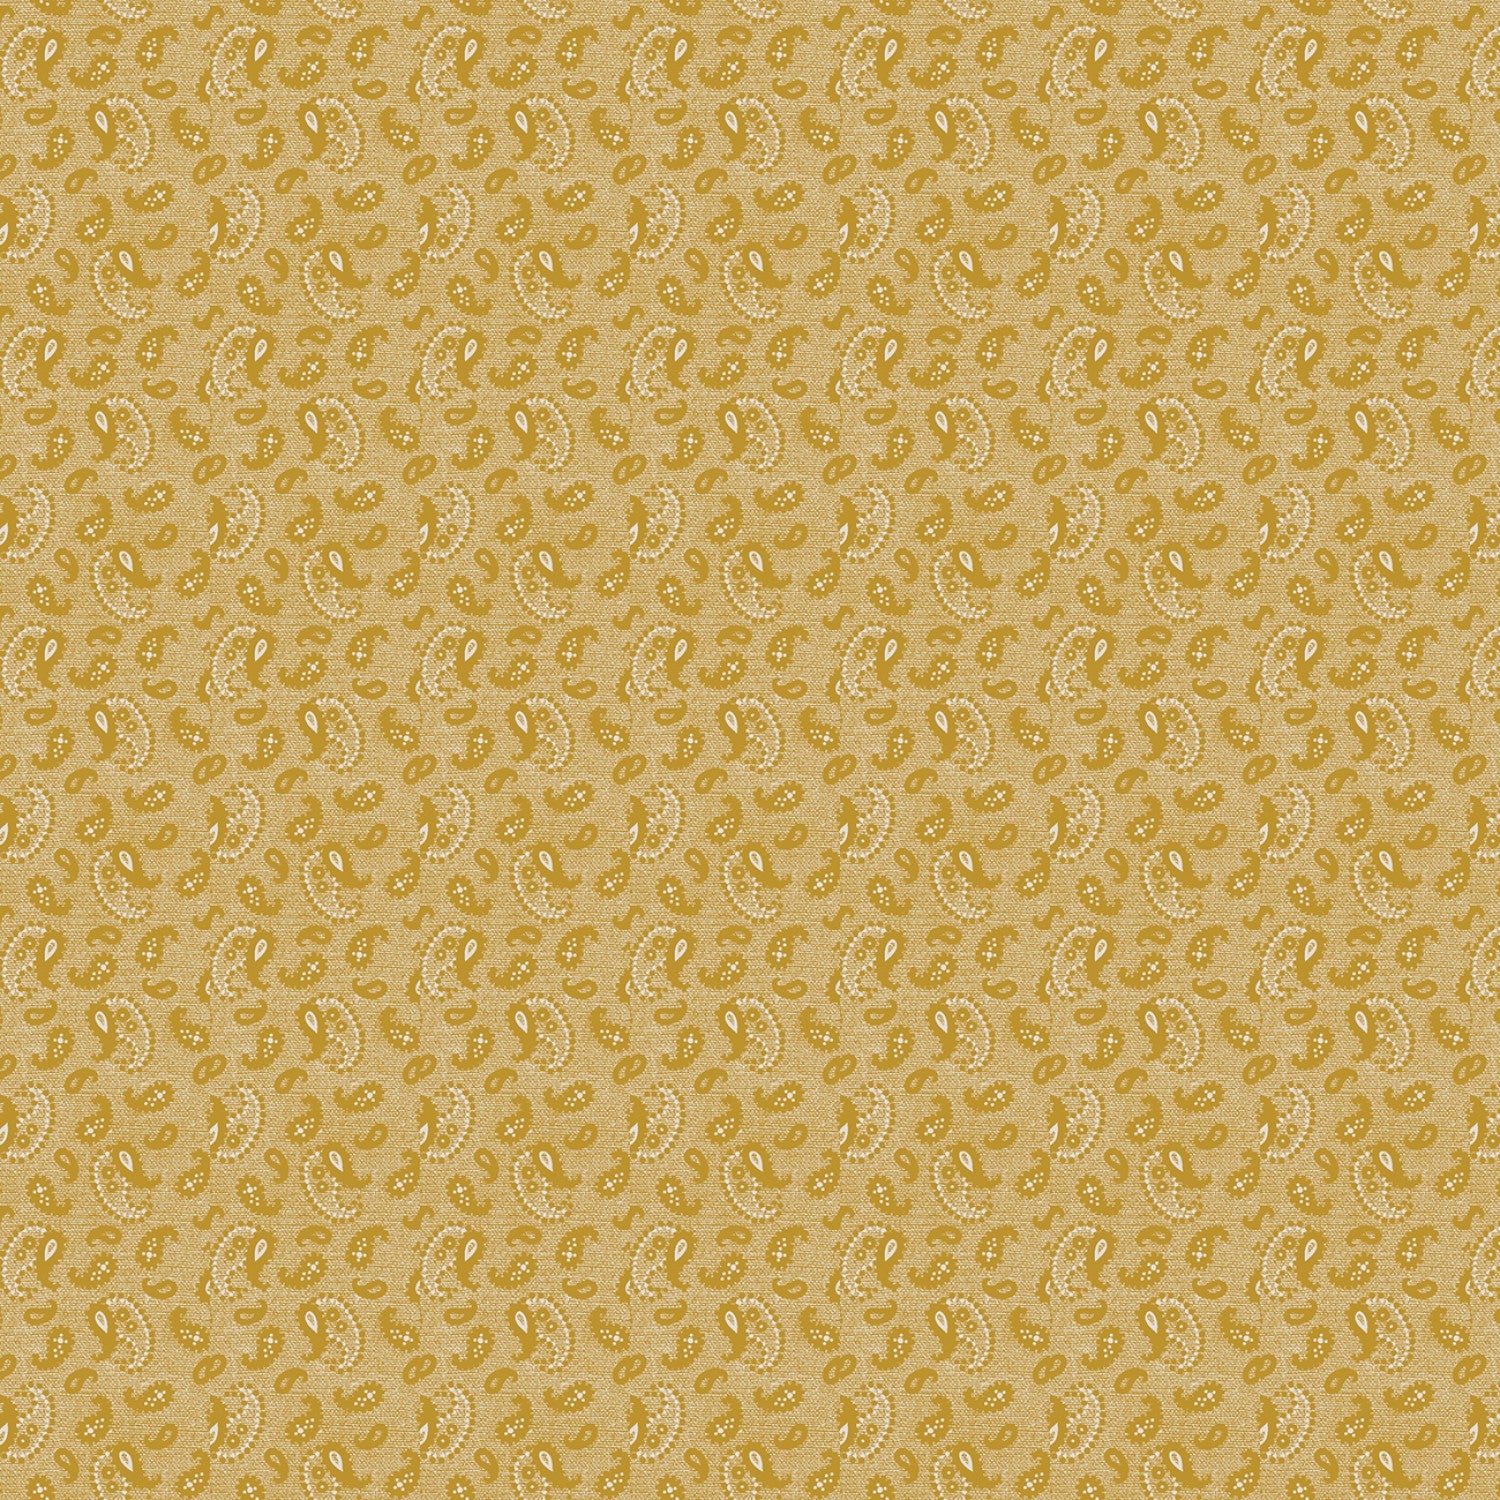 Fabric, Buttercup Bloom Paisley Gold, C11155R-Gold